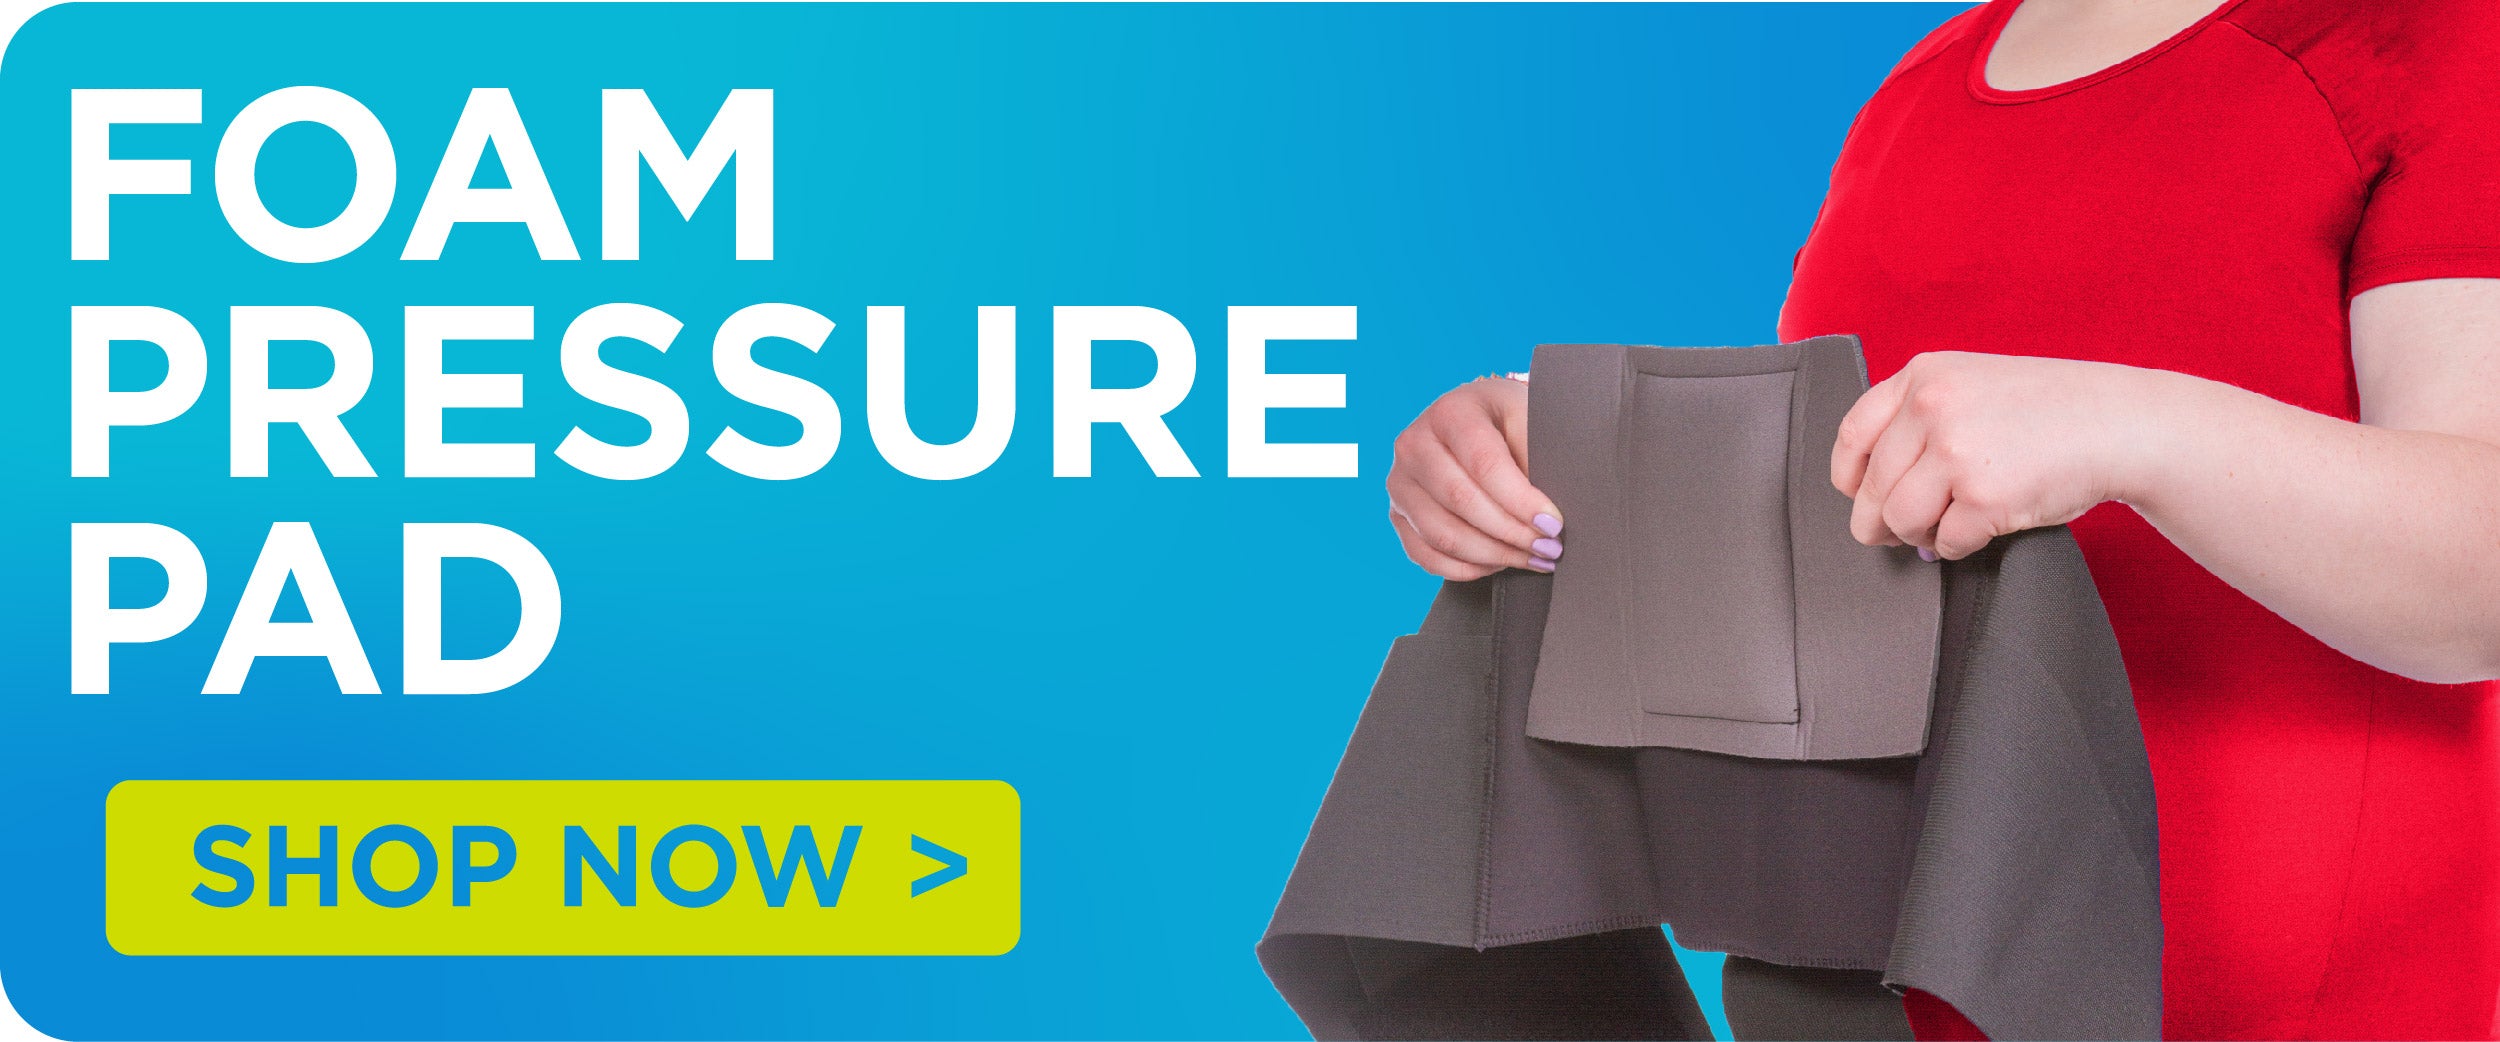 purchase a foam pressure pad for your lower back brace